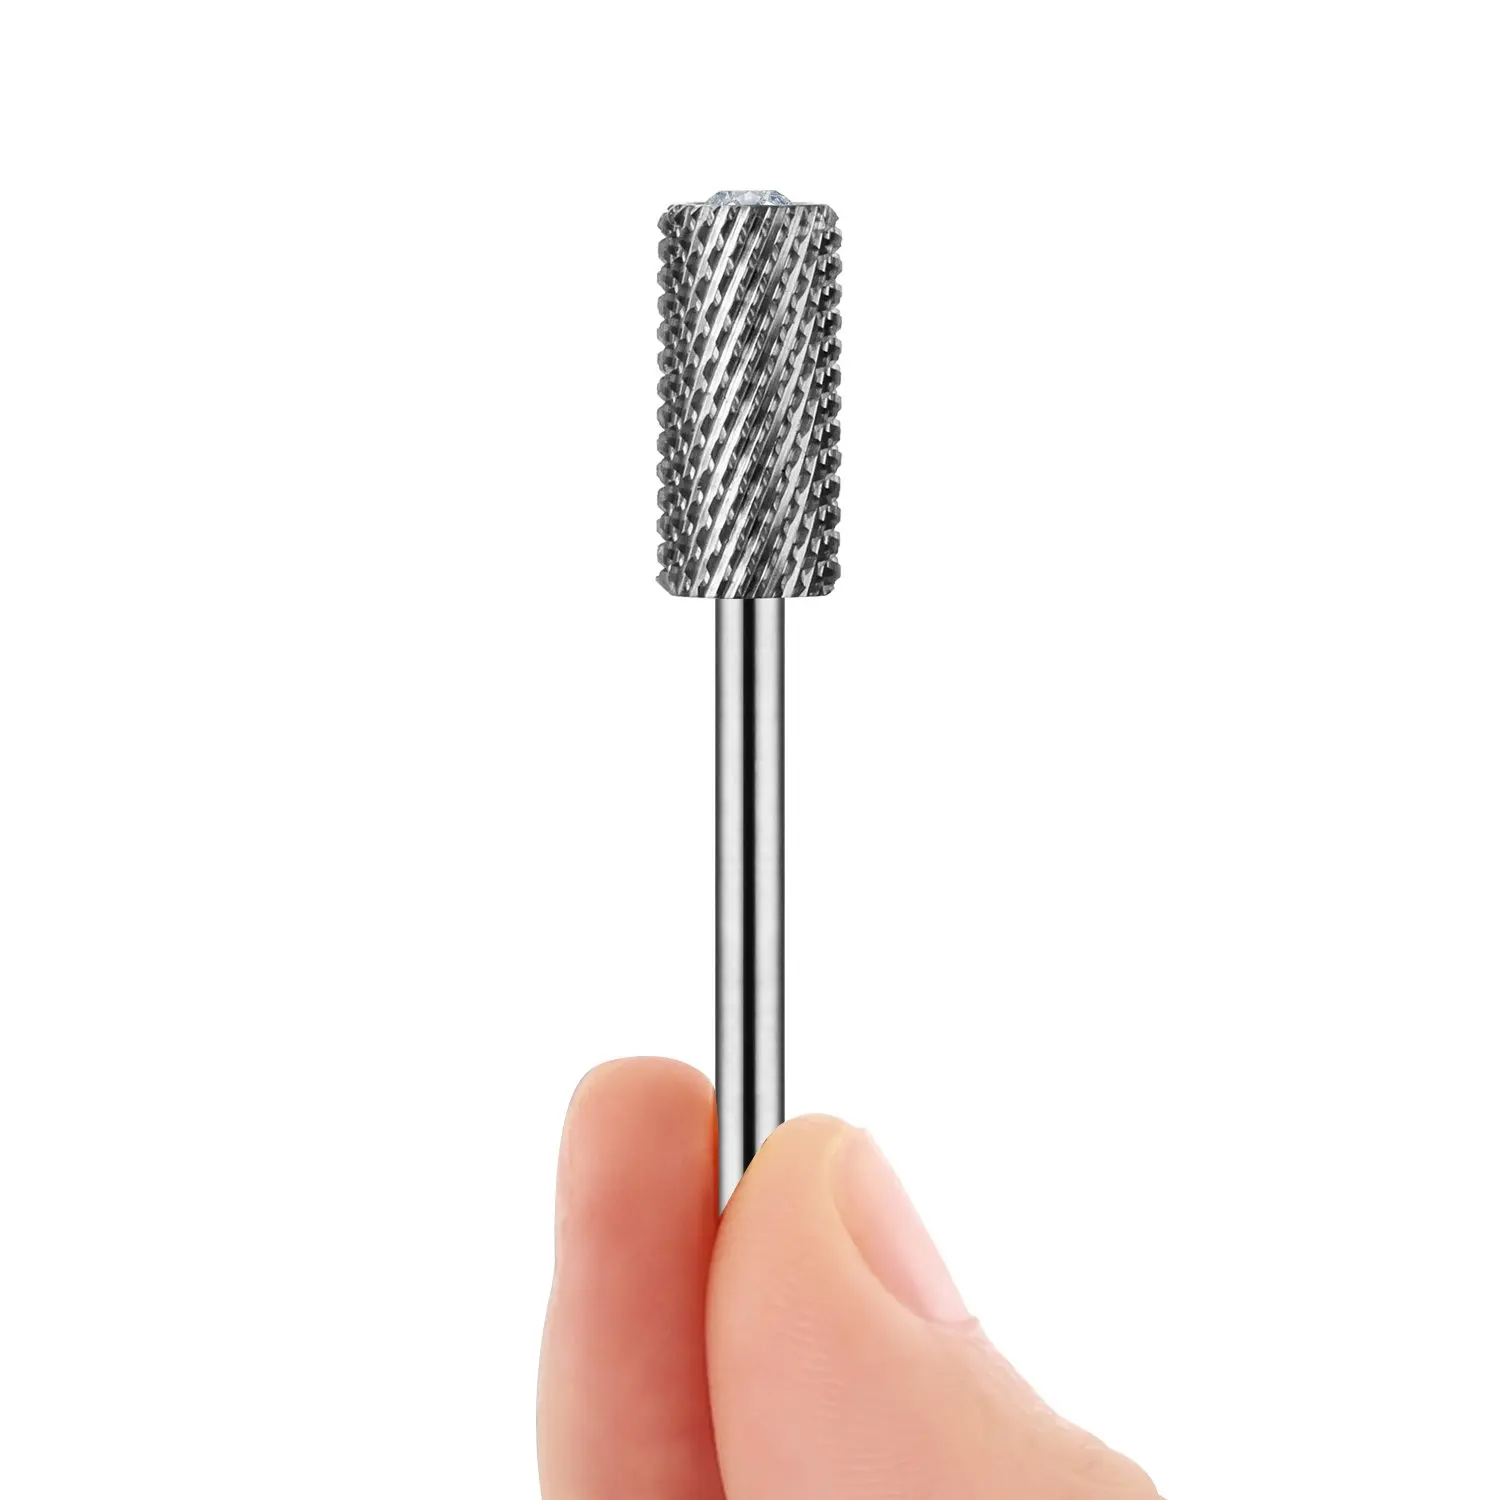 Manicure Drill Bit for Nails Decorated with Crystal for Removing Acrylic Nails, Gel Nails  Nail Drill Machine